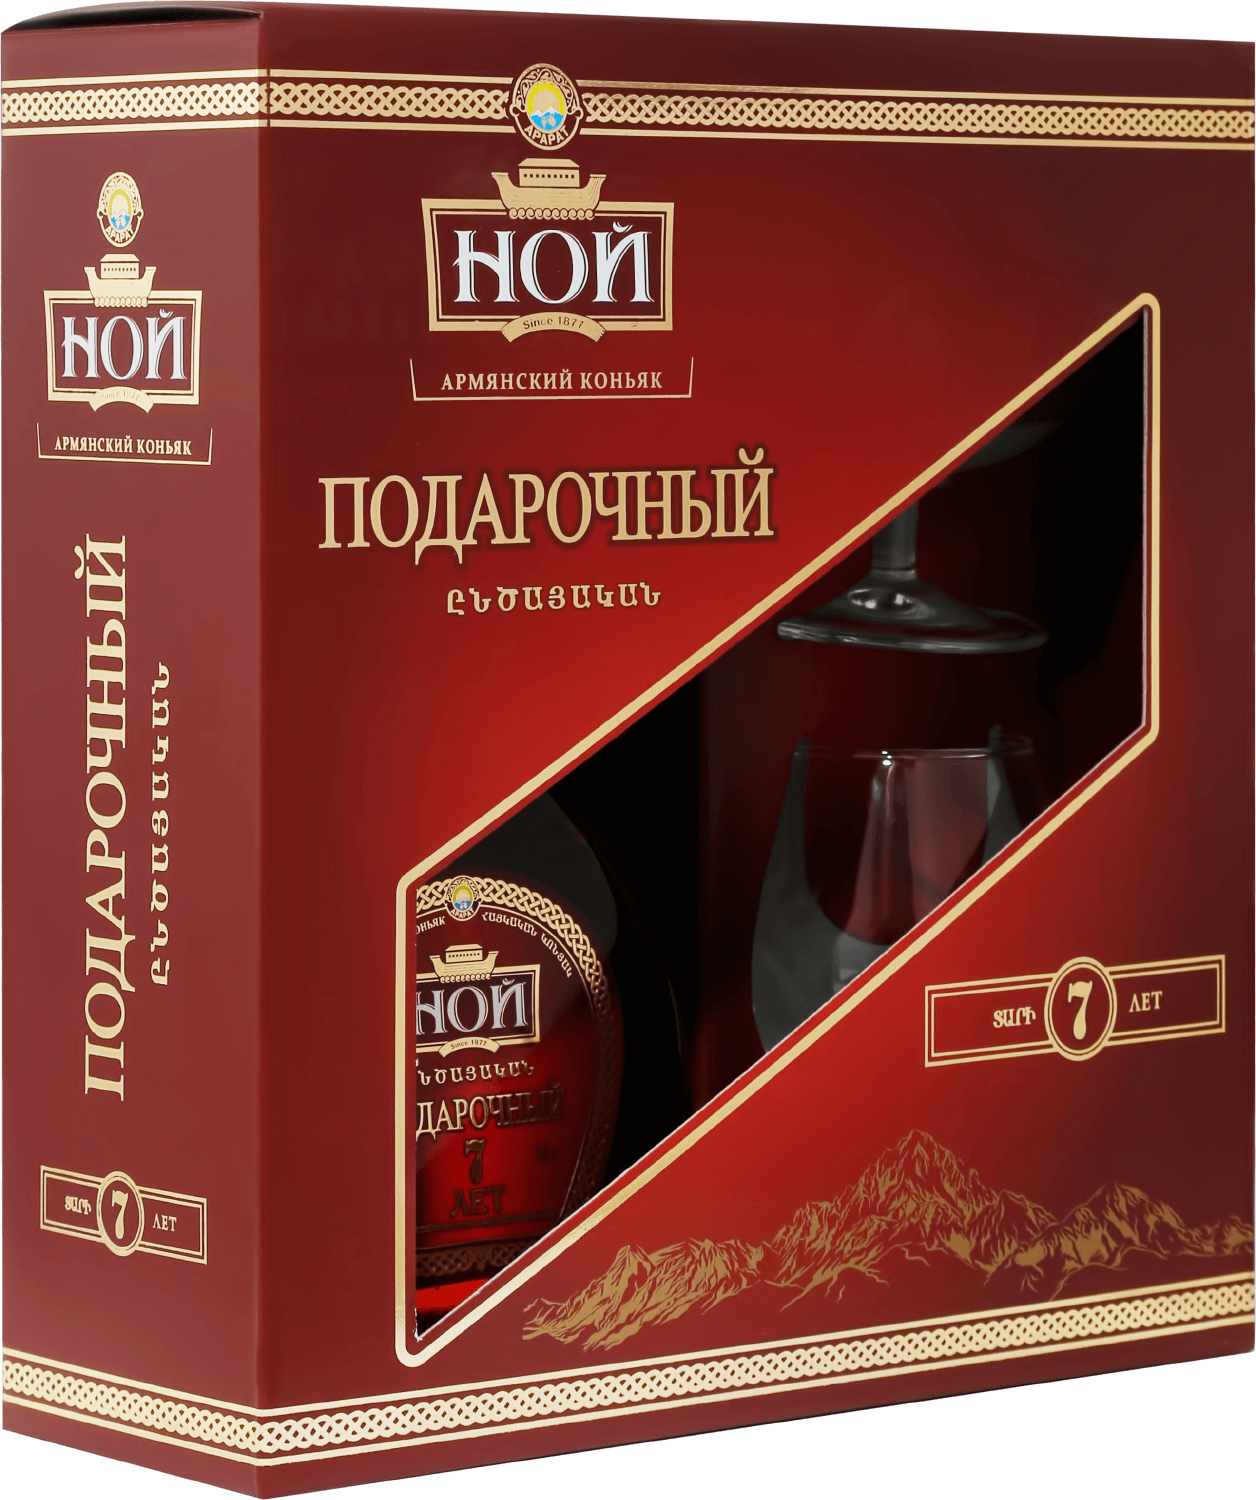 Noy Podarochniy Armenian Brandy 7 y.o. in gift box with two glasses courvoisier vs in gift box with two glasses